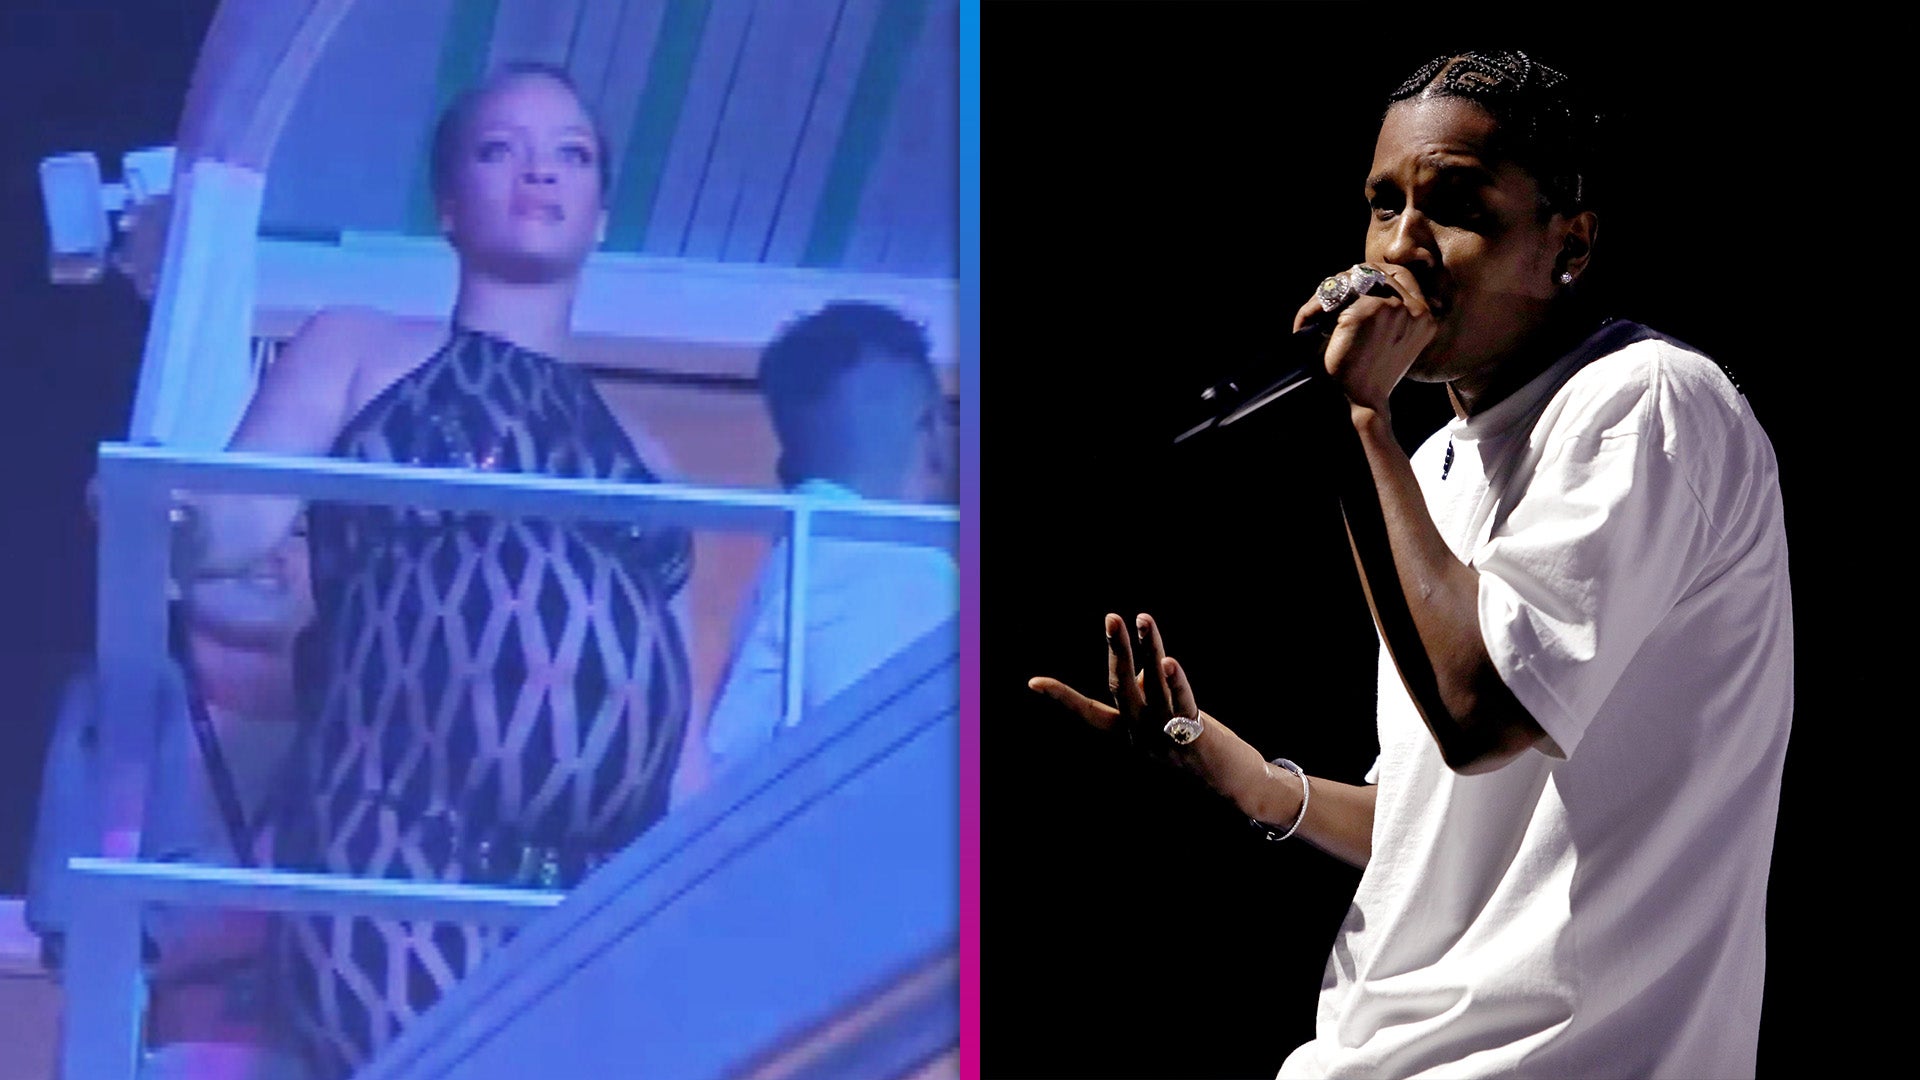 ASAP Rocky Calls Pregnant Rihanna His 'Wife' in Sweet Performance